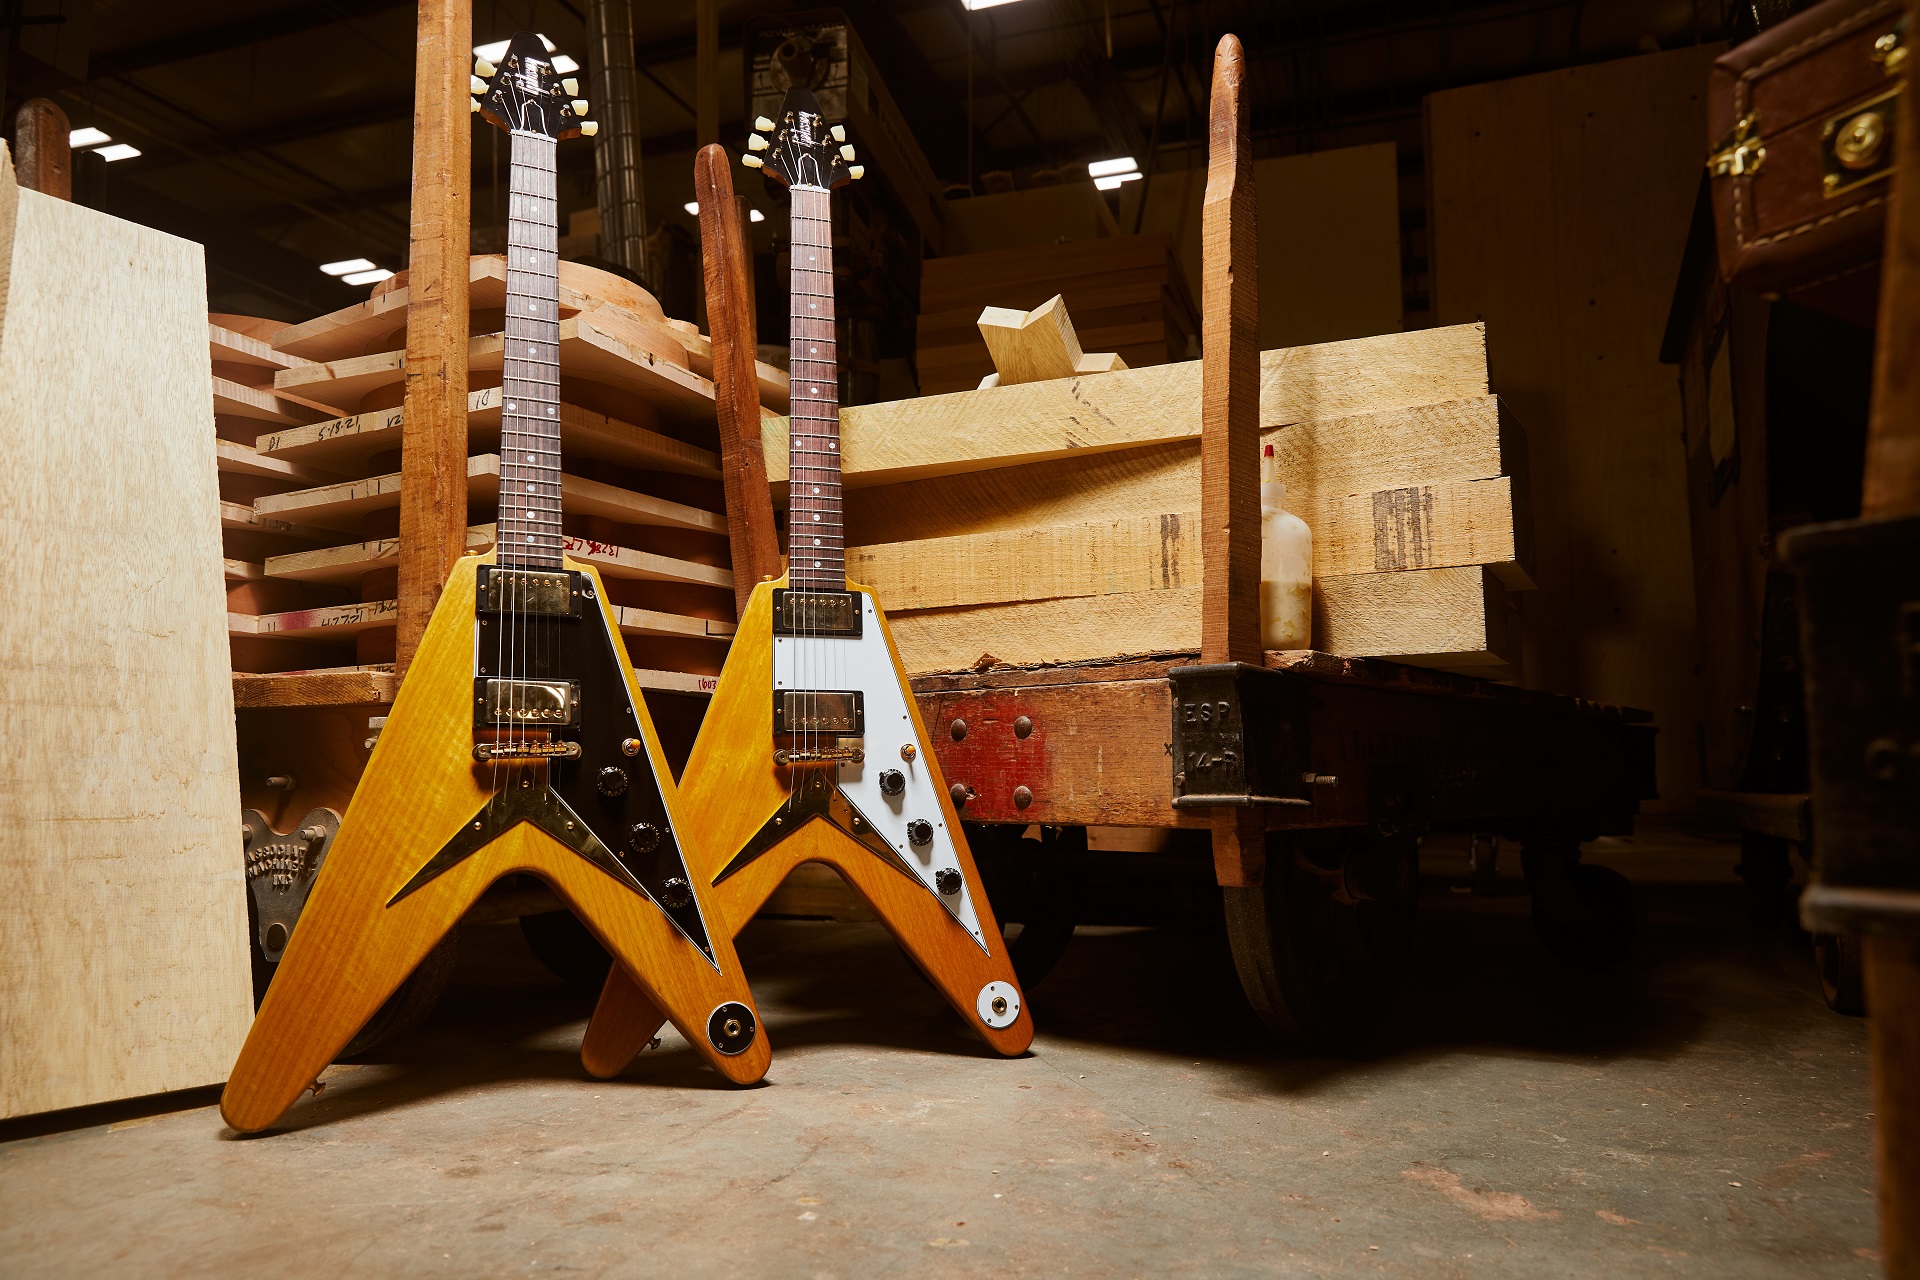 Two Gibson Custom Shop 1958 Korina Flying V Reissues (one in Black and White) behind the backdrop of a Gibson warehouse.